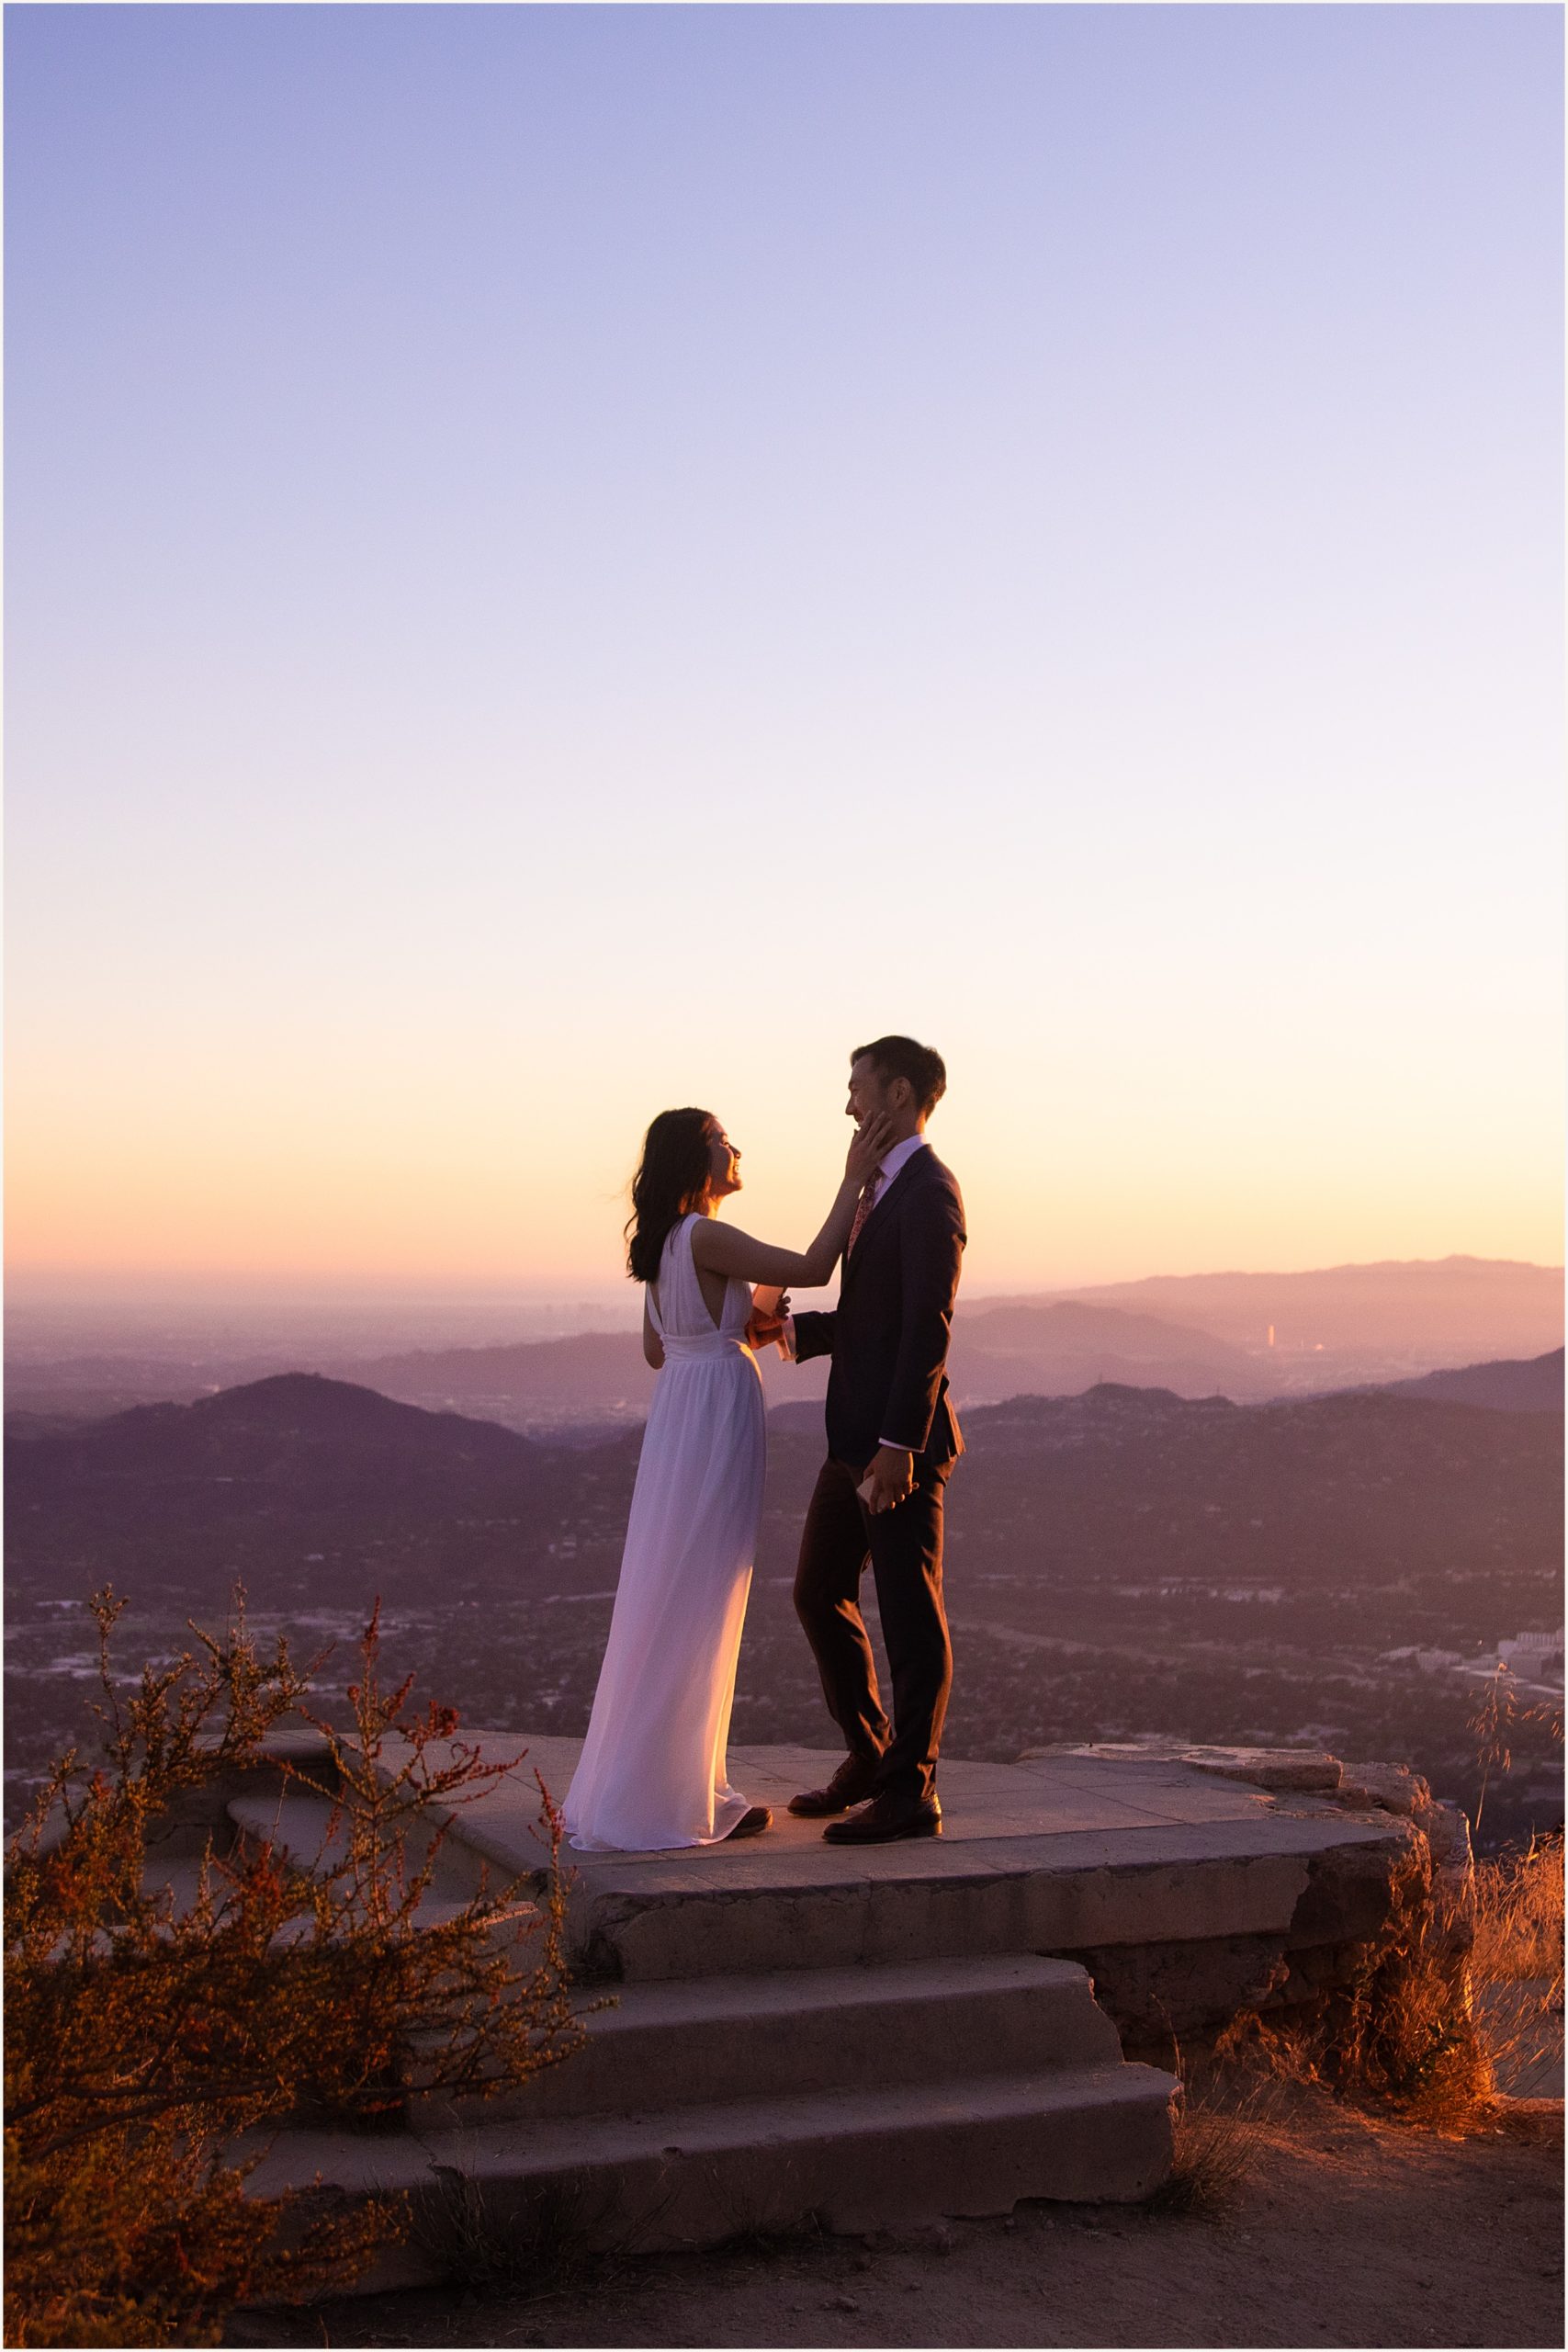 hang-and-Matt_0013 6 Adventure Elopement Tips: How to Stay Looking Fresh for Your Hiking Elopement